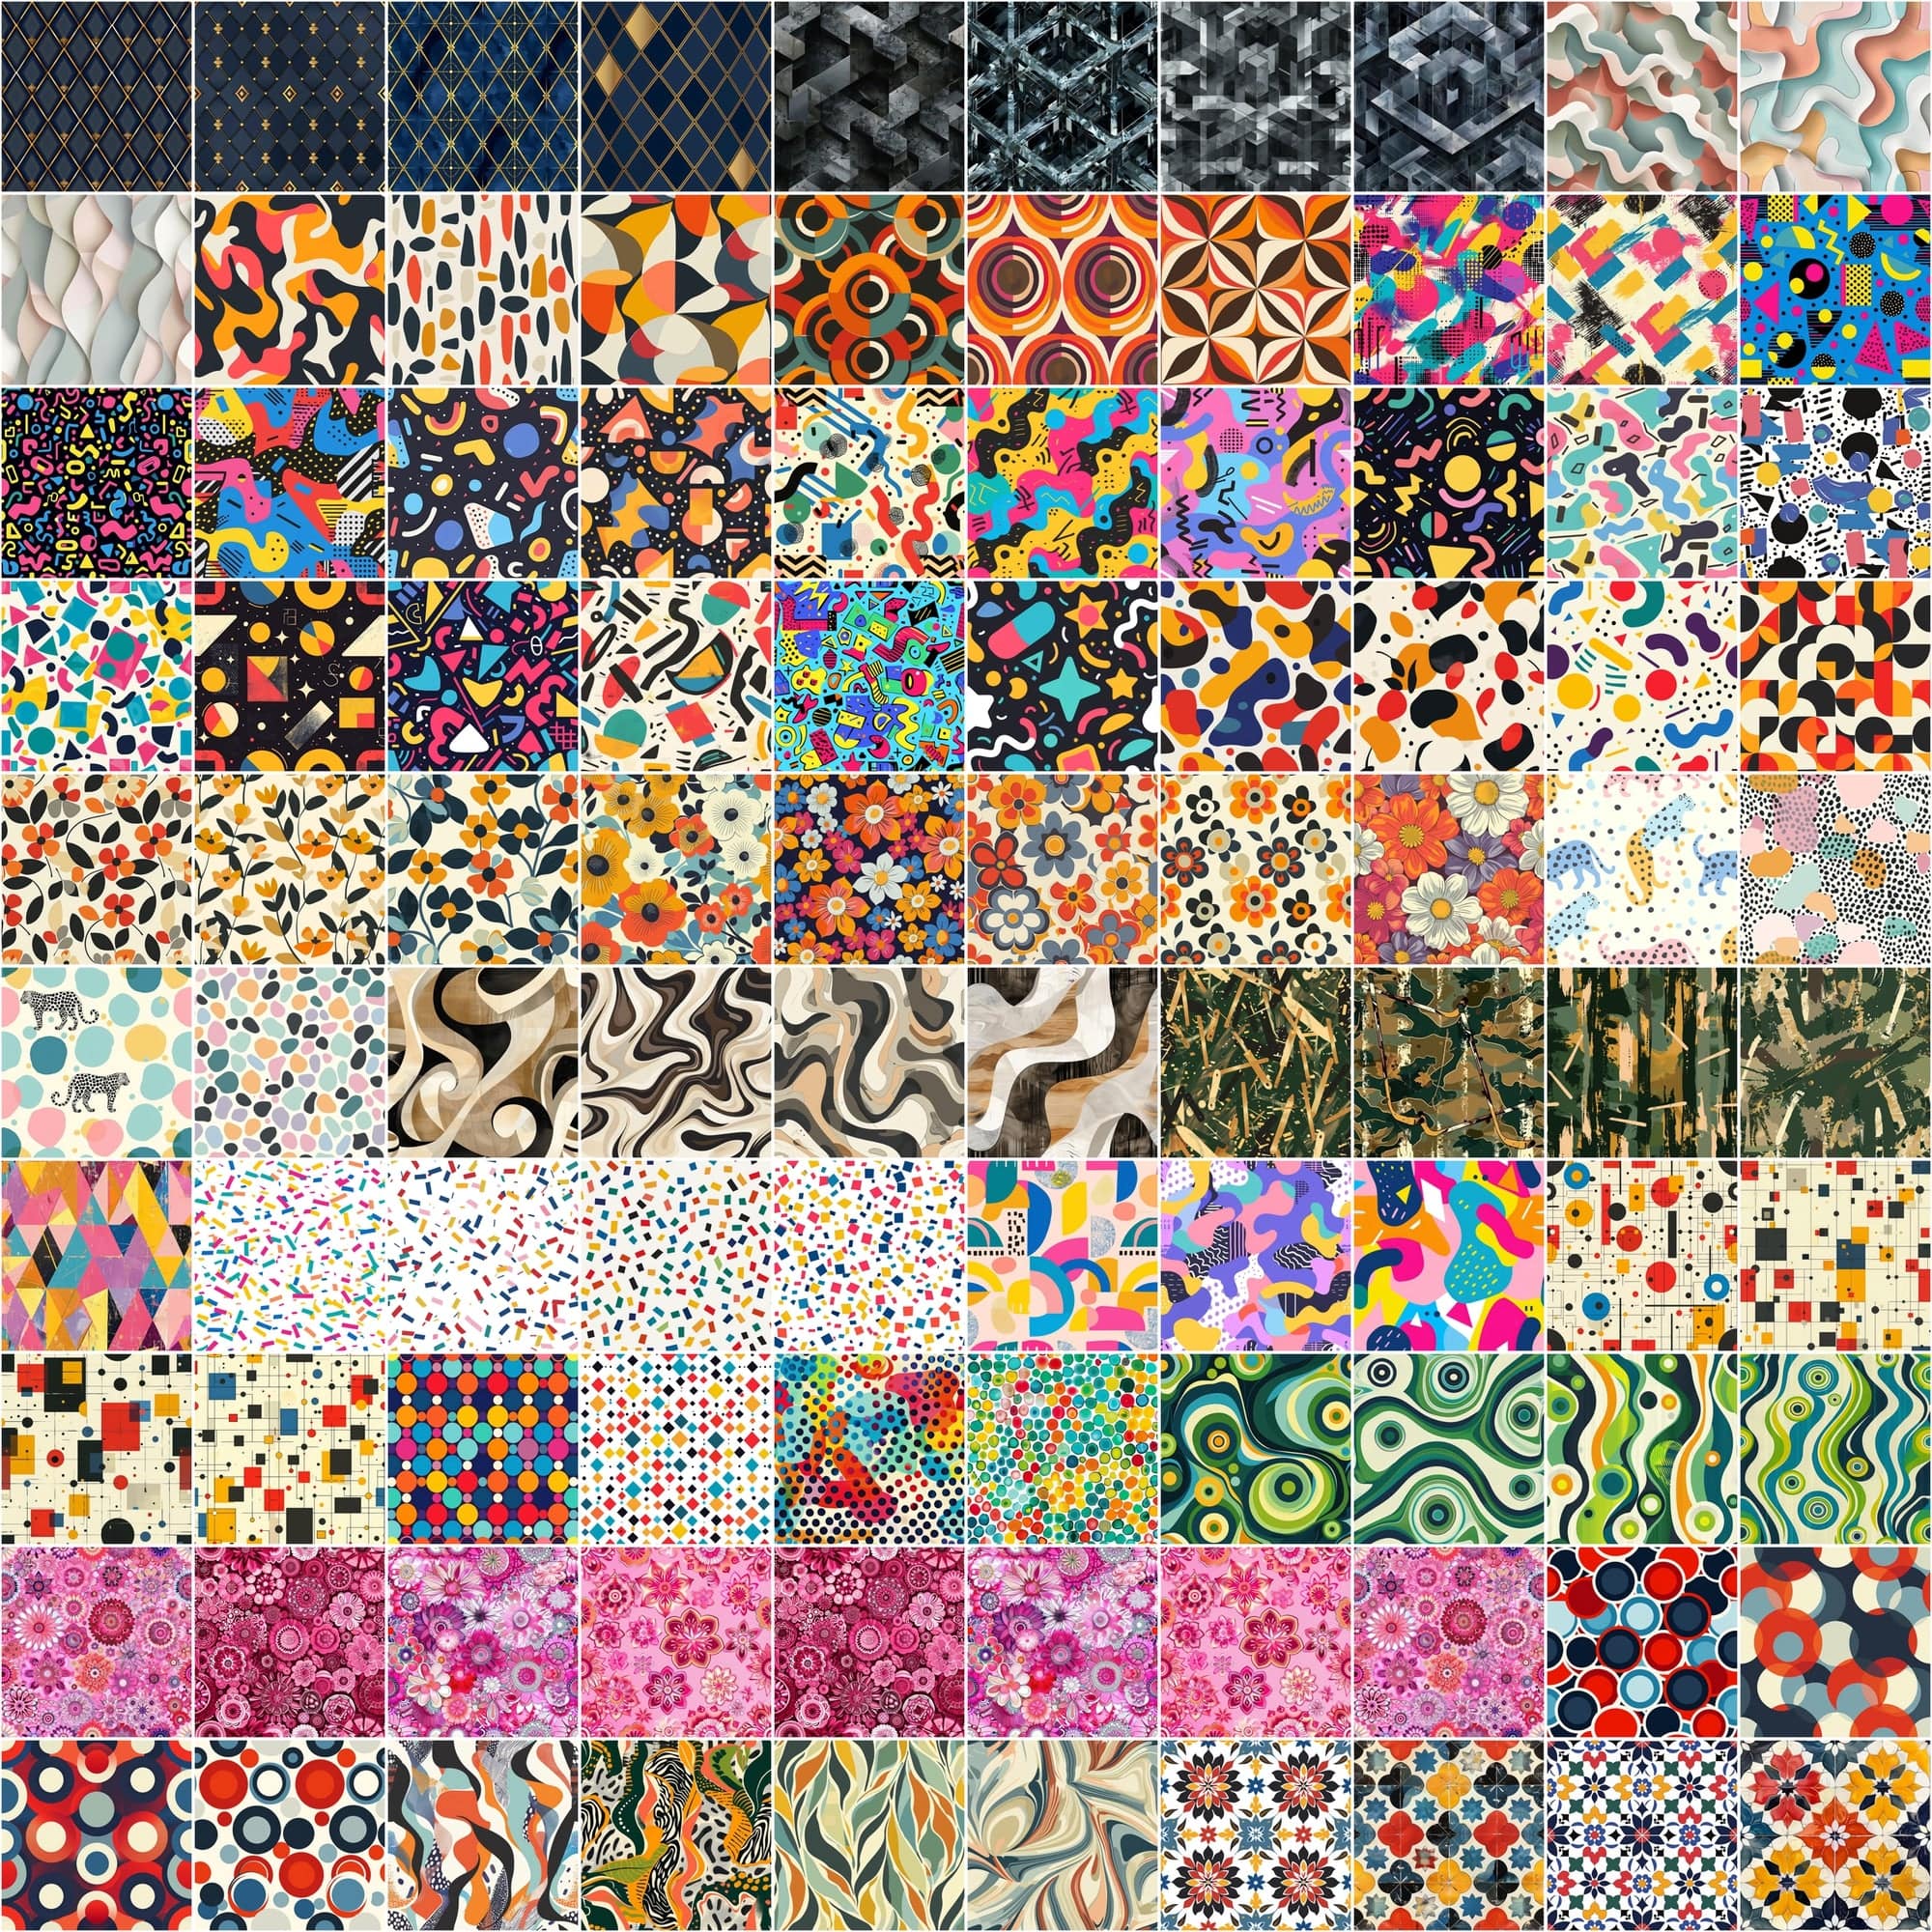 Ultimate Collection of 1000 Seamless Patterns Digital Download Sumobundle